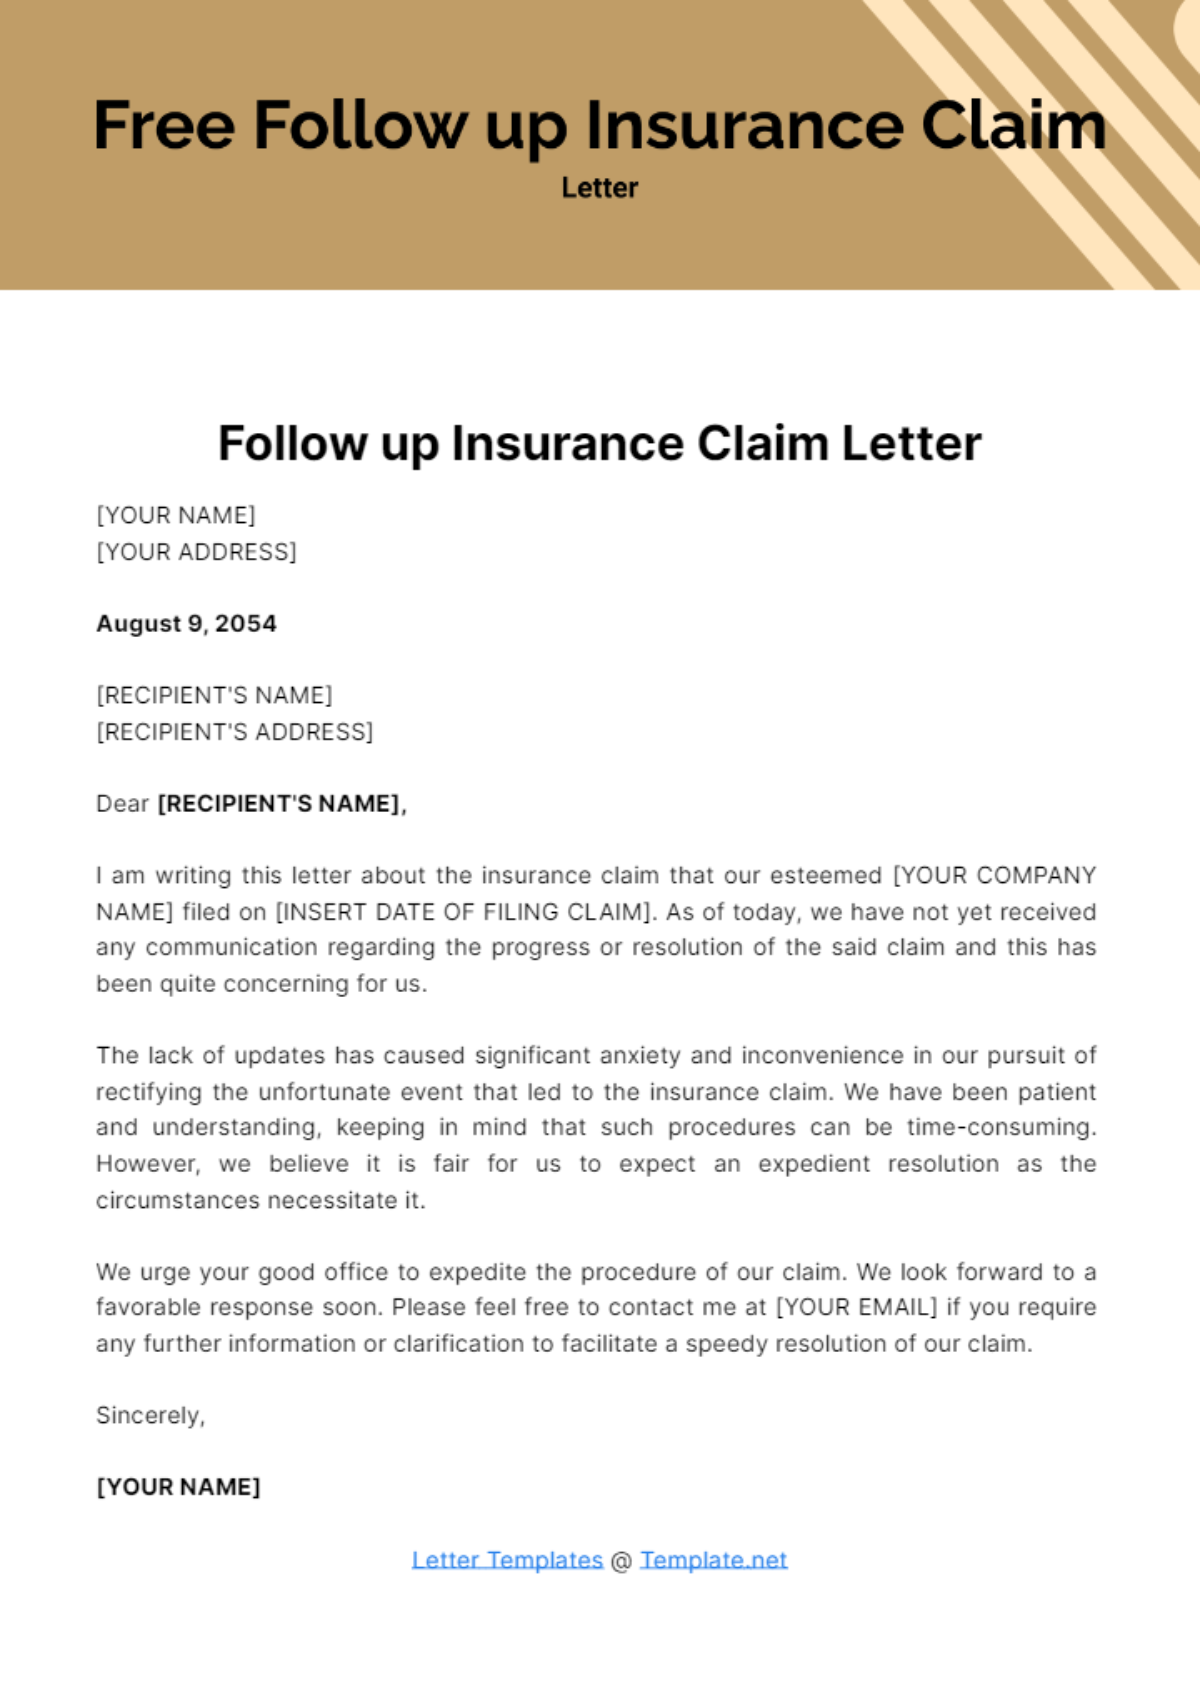 Follow up Insurance Claim Letter Template